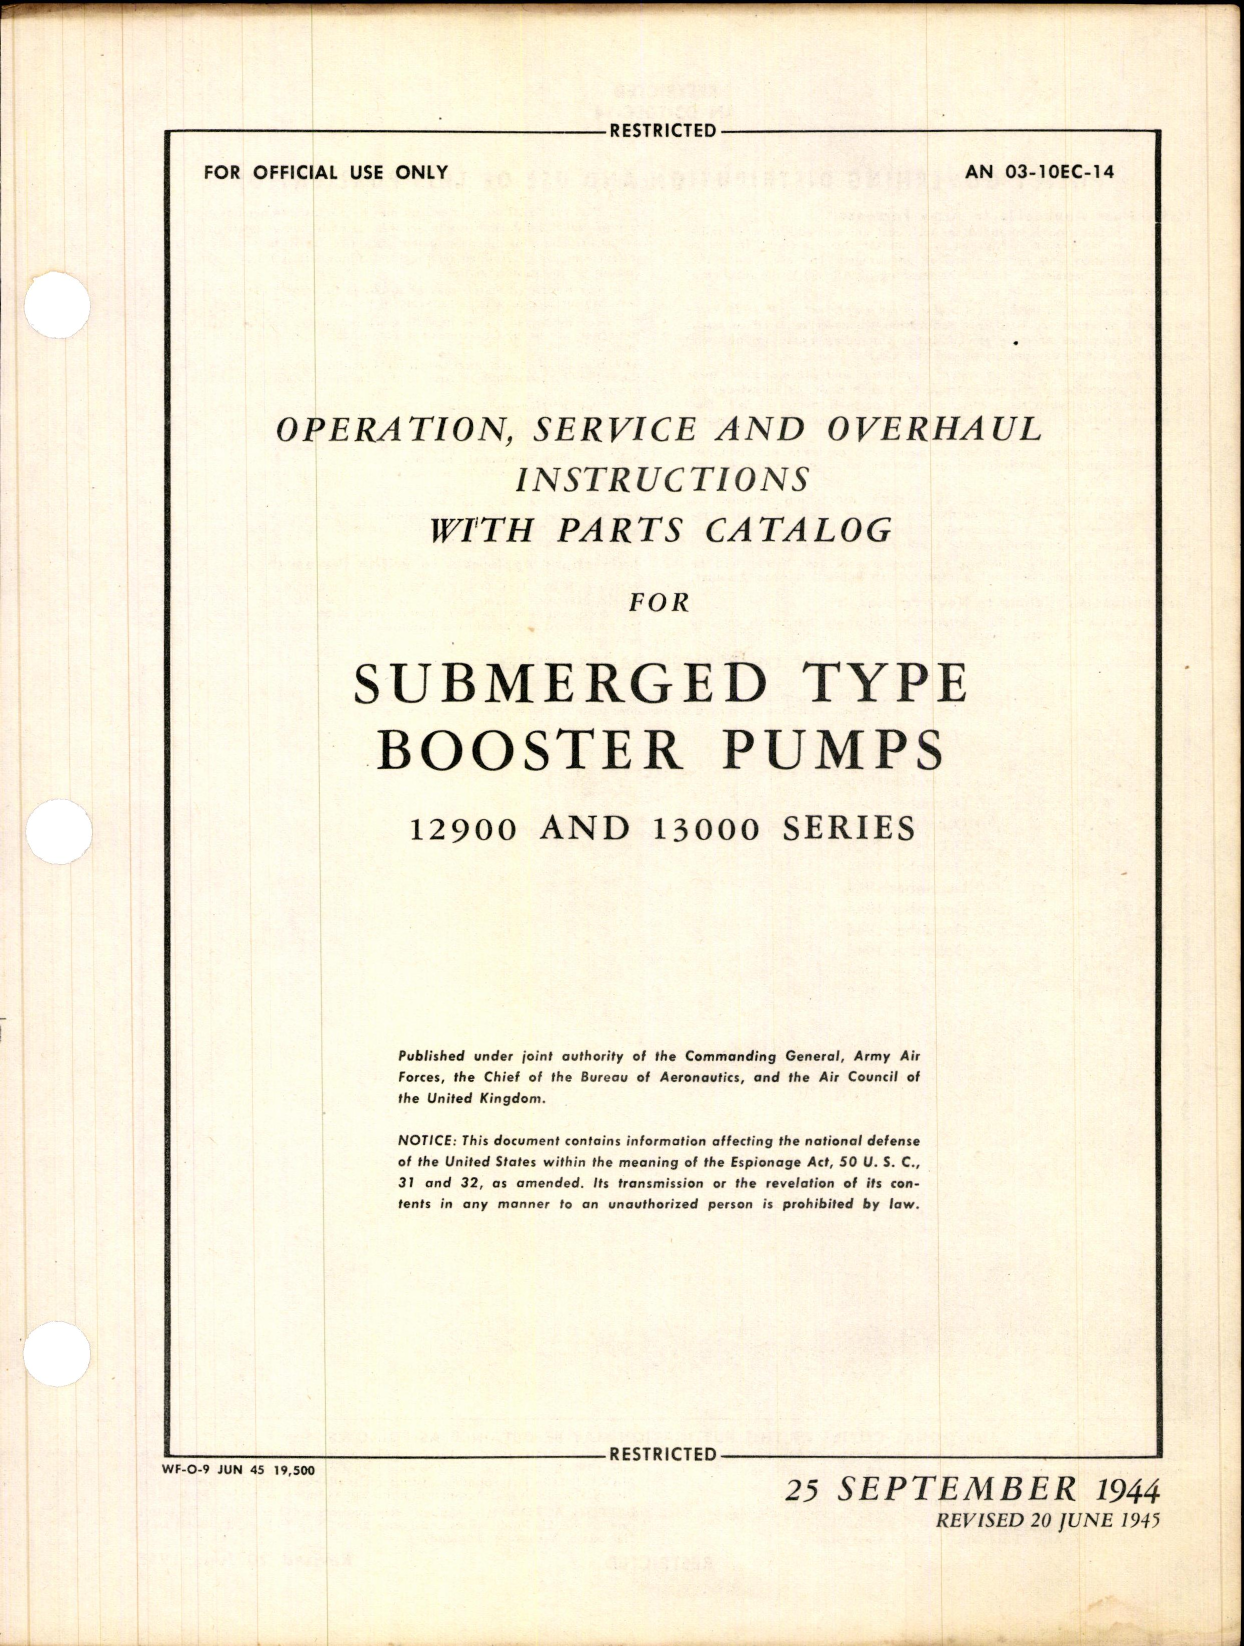 Sample page 1 from AirCorps Library document: Operation, Service, & Overhaul Inst w/ Parts Catalog for Submerged Type Booster Pumps